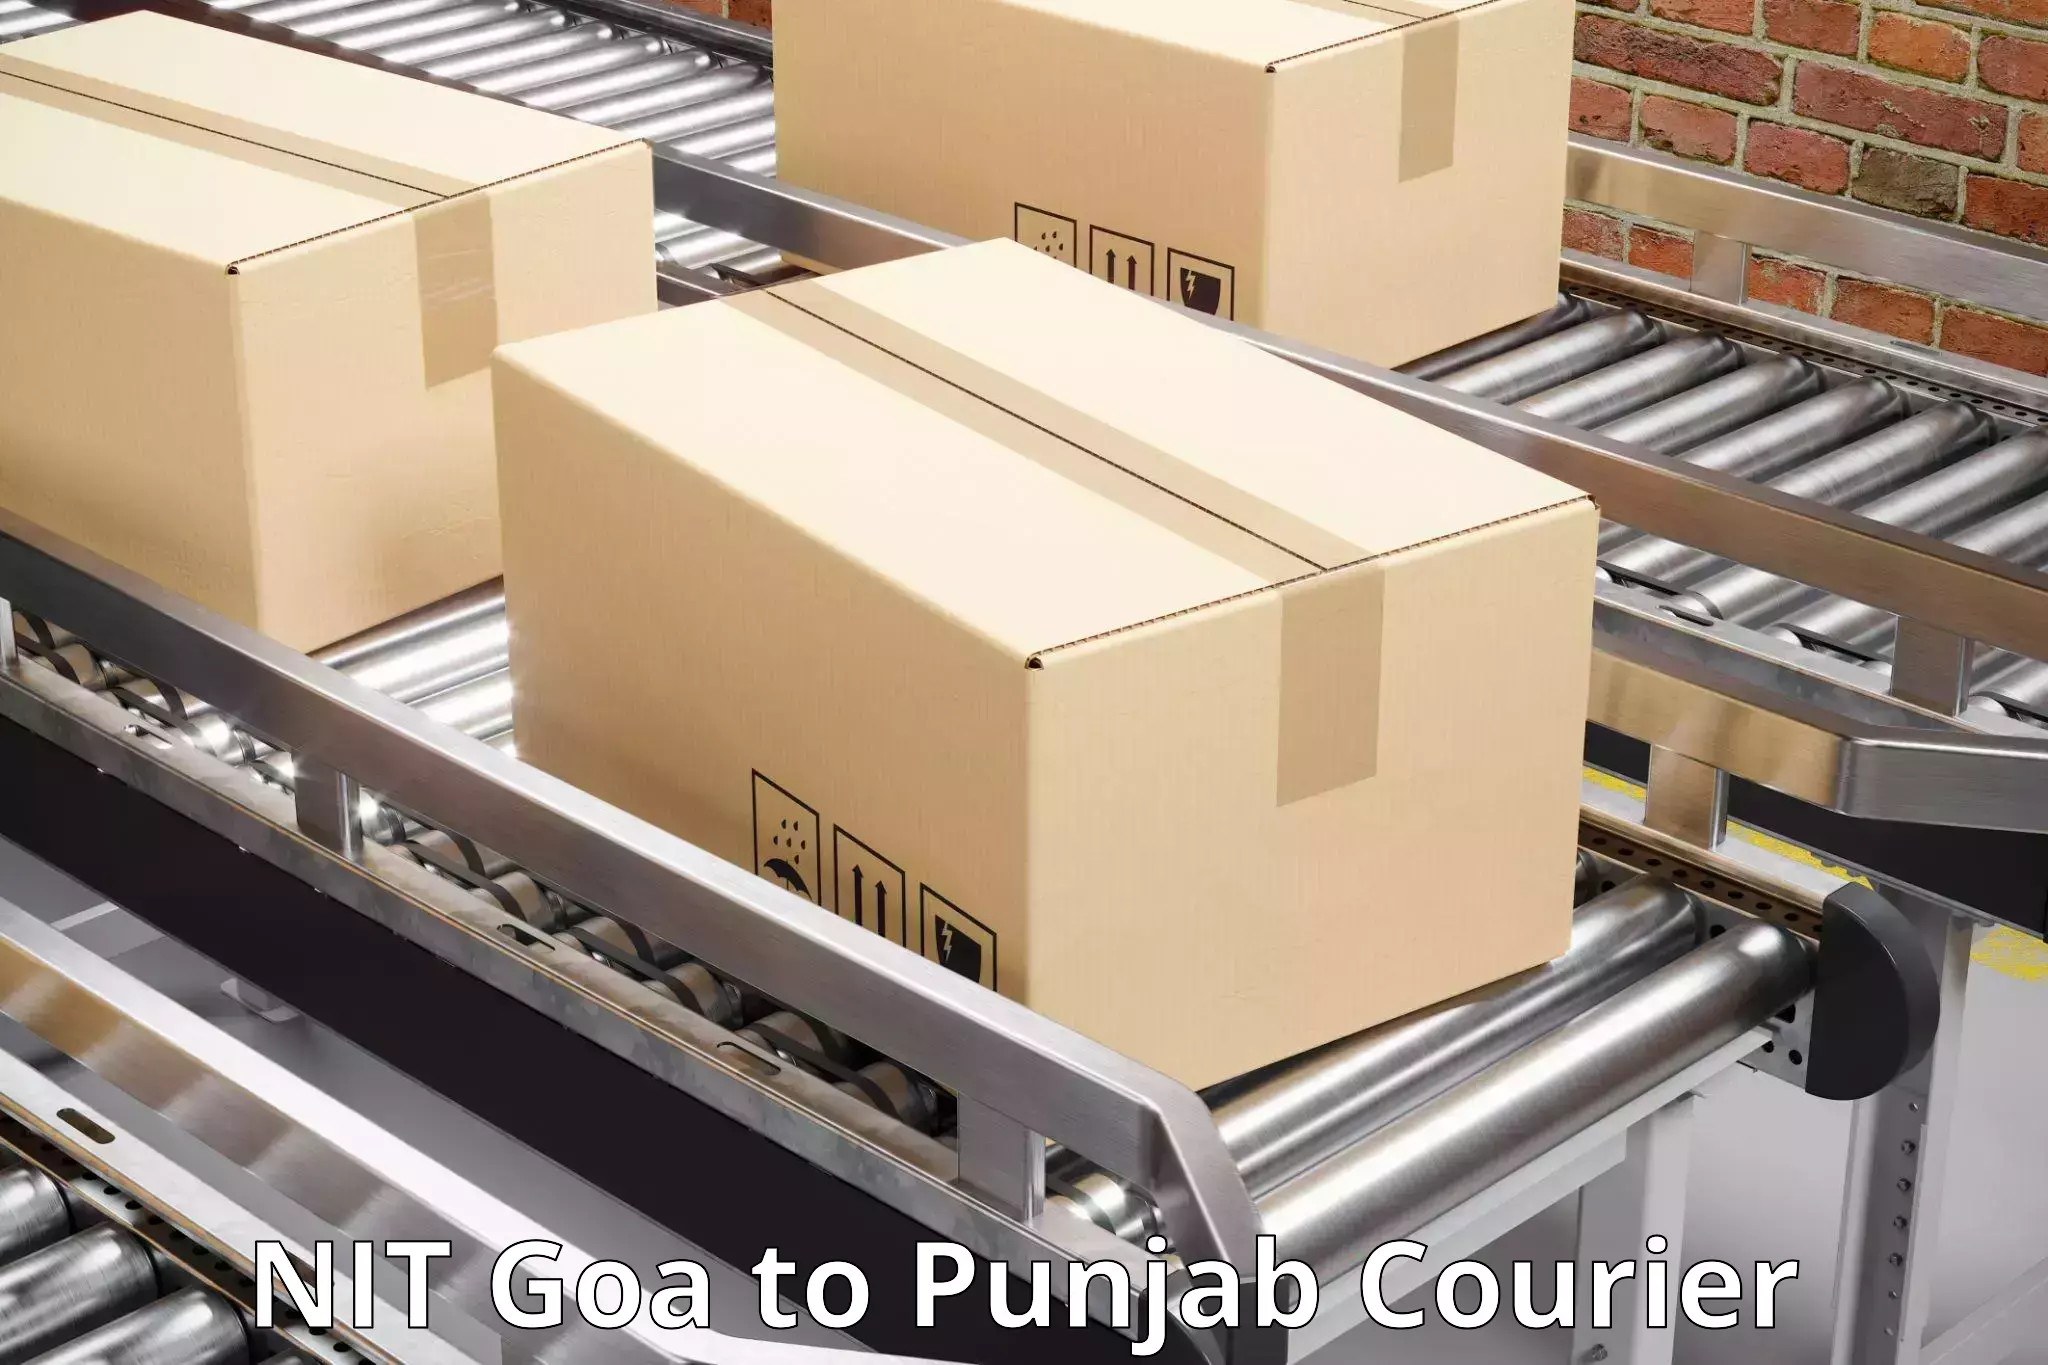 24/7 courier service NIT Goa to Firozpur